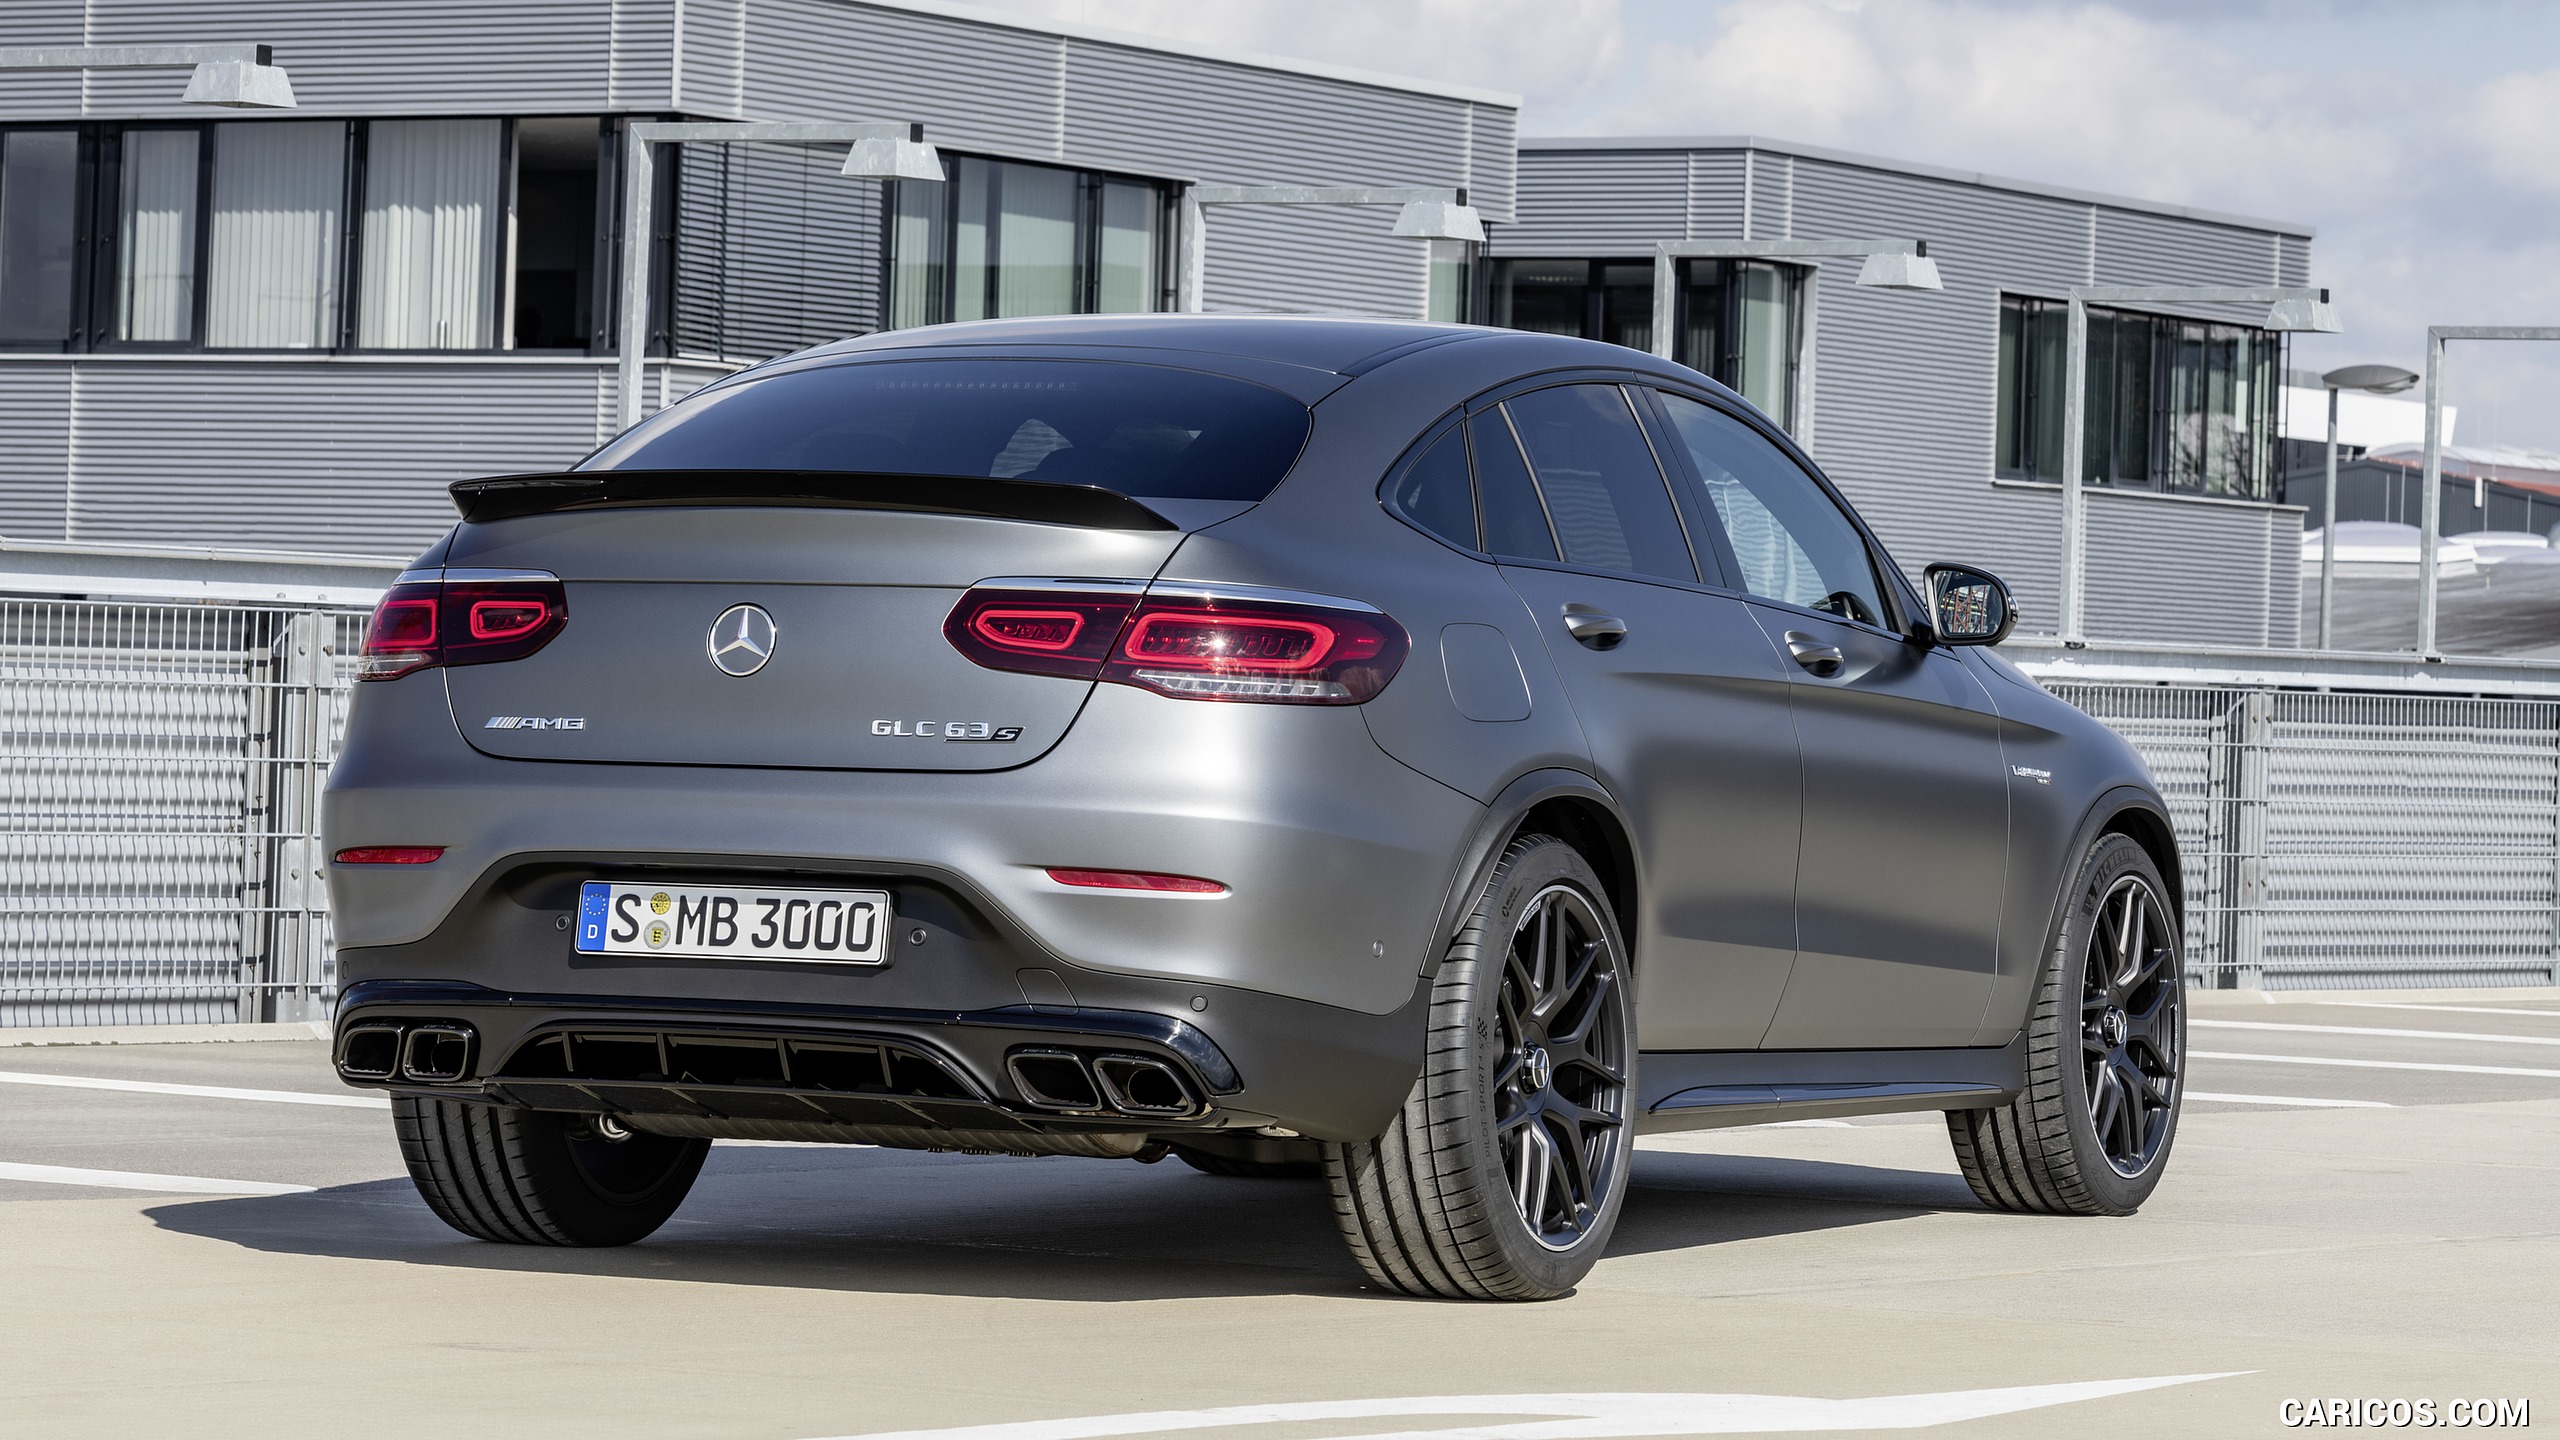 2020 Mercedes-AMG GLC 63 S 4MATIC+ Coupe - Rear, #9 of 102